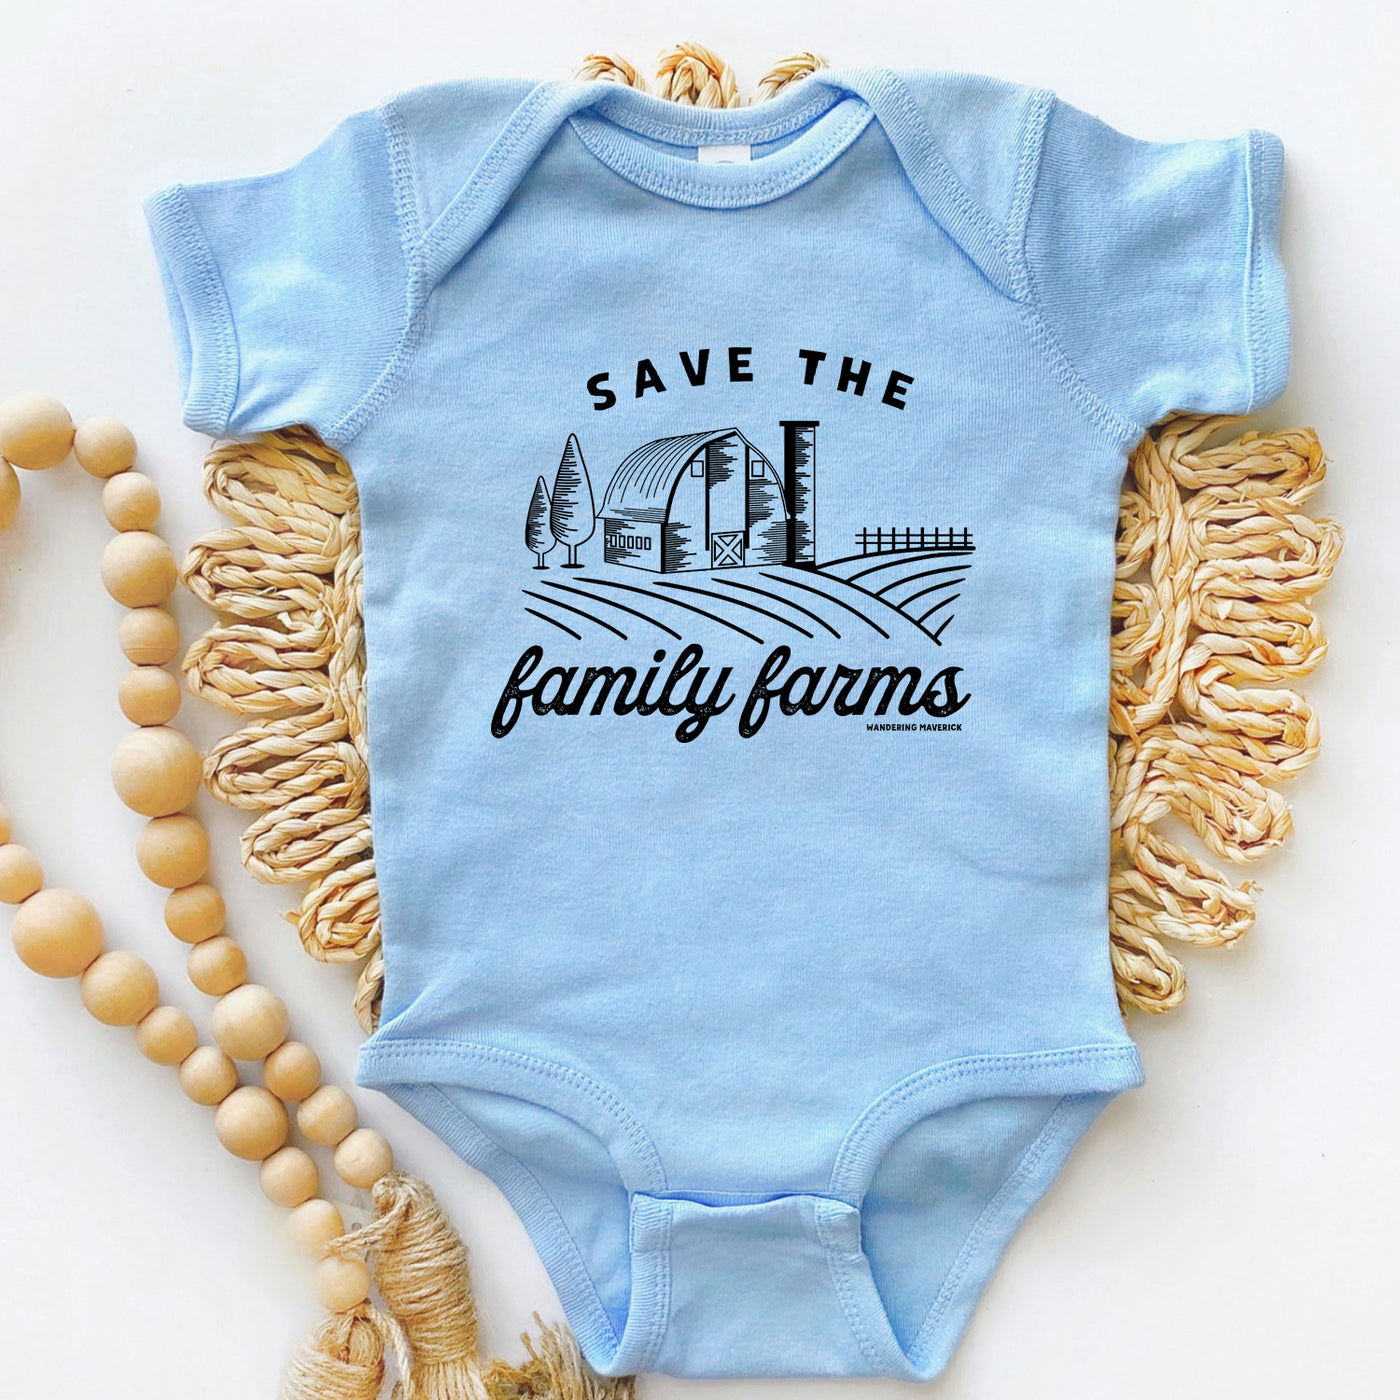 Save The Family Farms One Piece/T-Shirt (Newborn - Youth XL) - Multiple Colors!